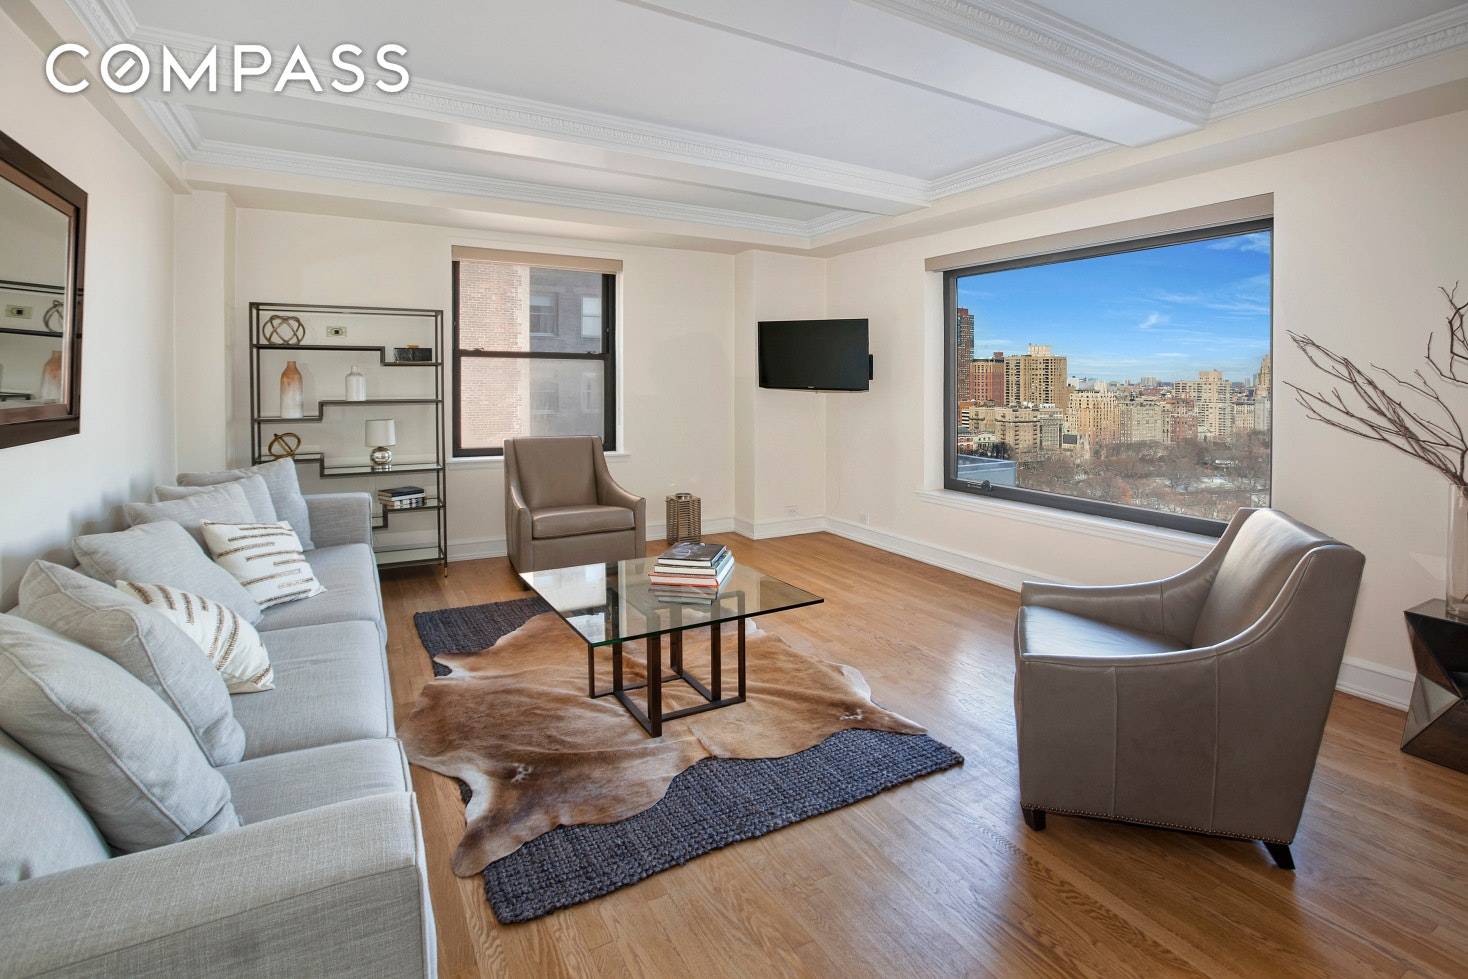 Make glorious Central Park views your daily backdrop in this impeccable one bedroom home at the prestigious Essex House.